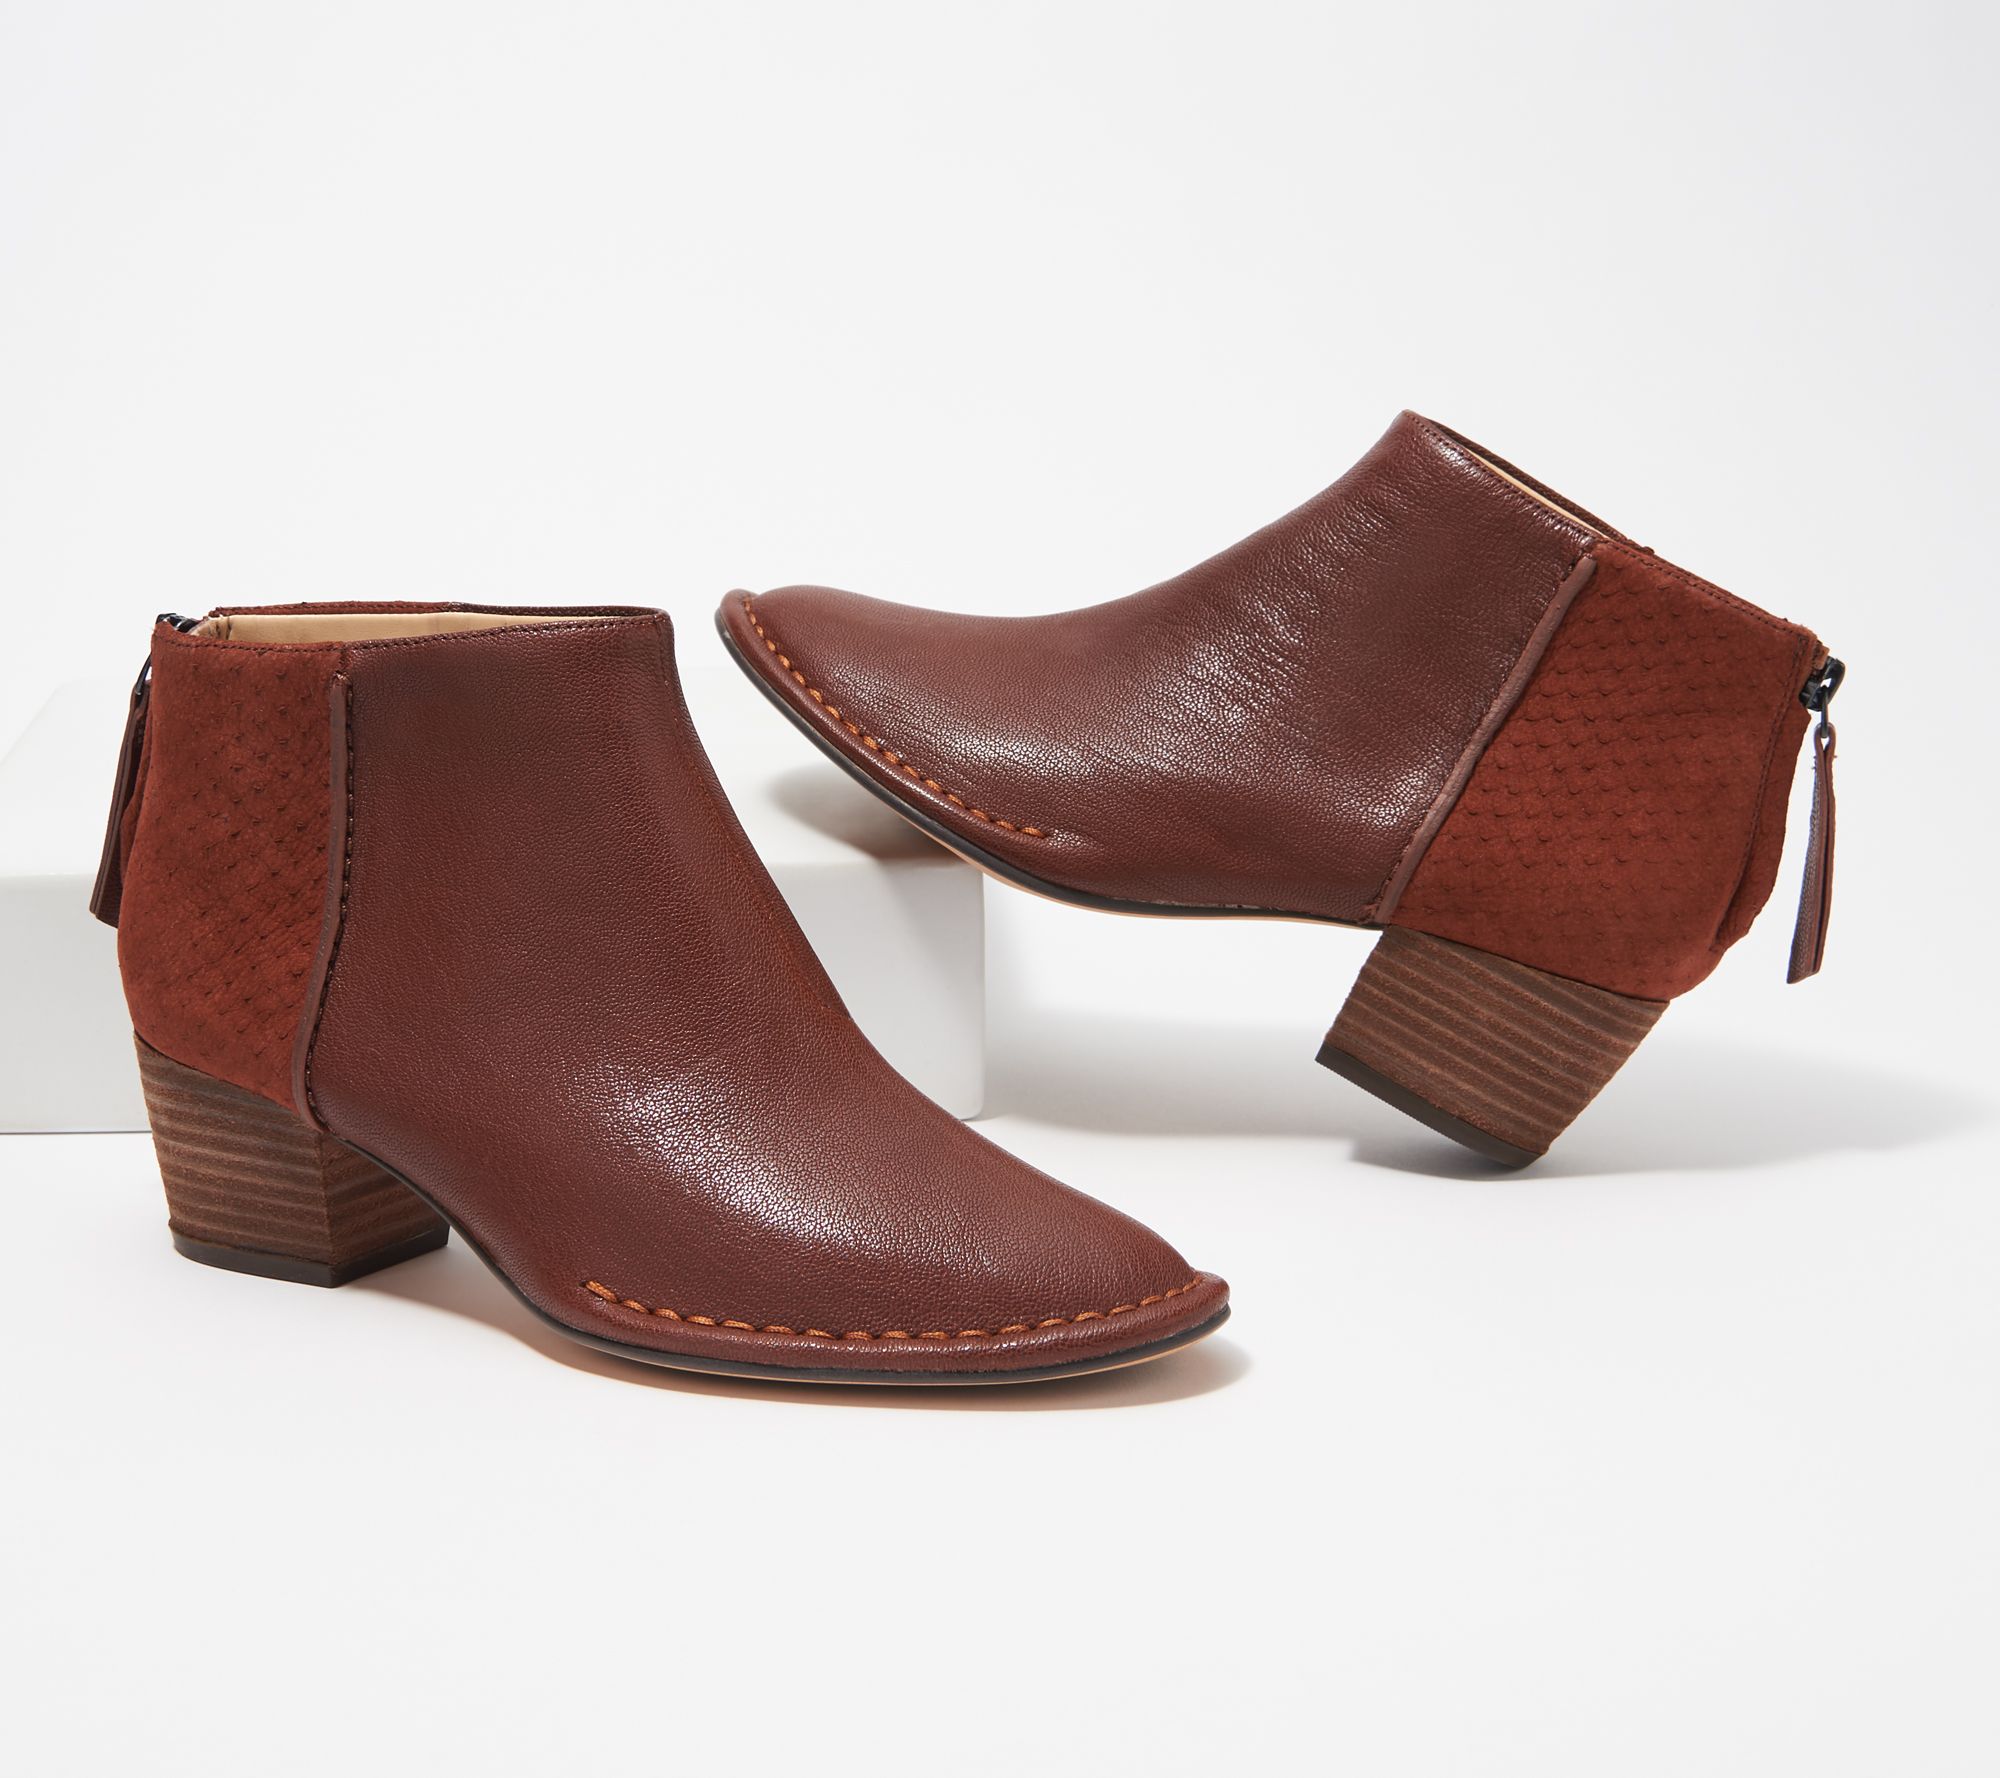 Clarks Leather Ankle Boots - Spiced 